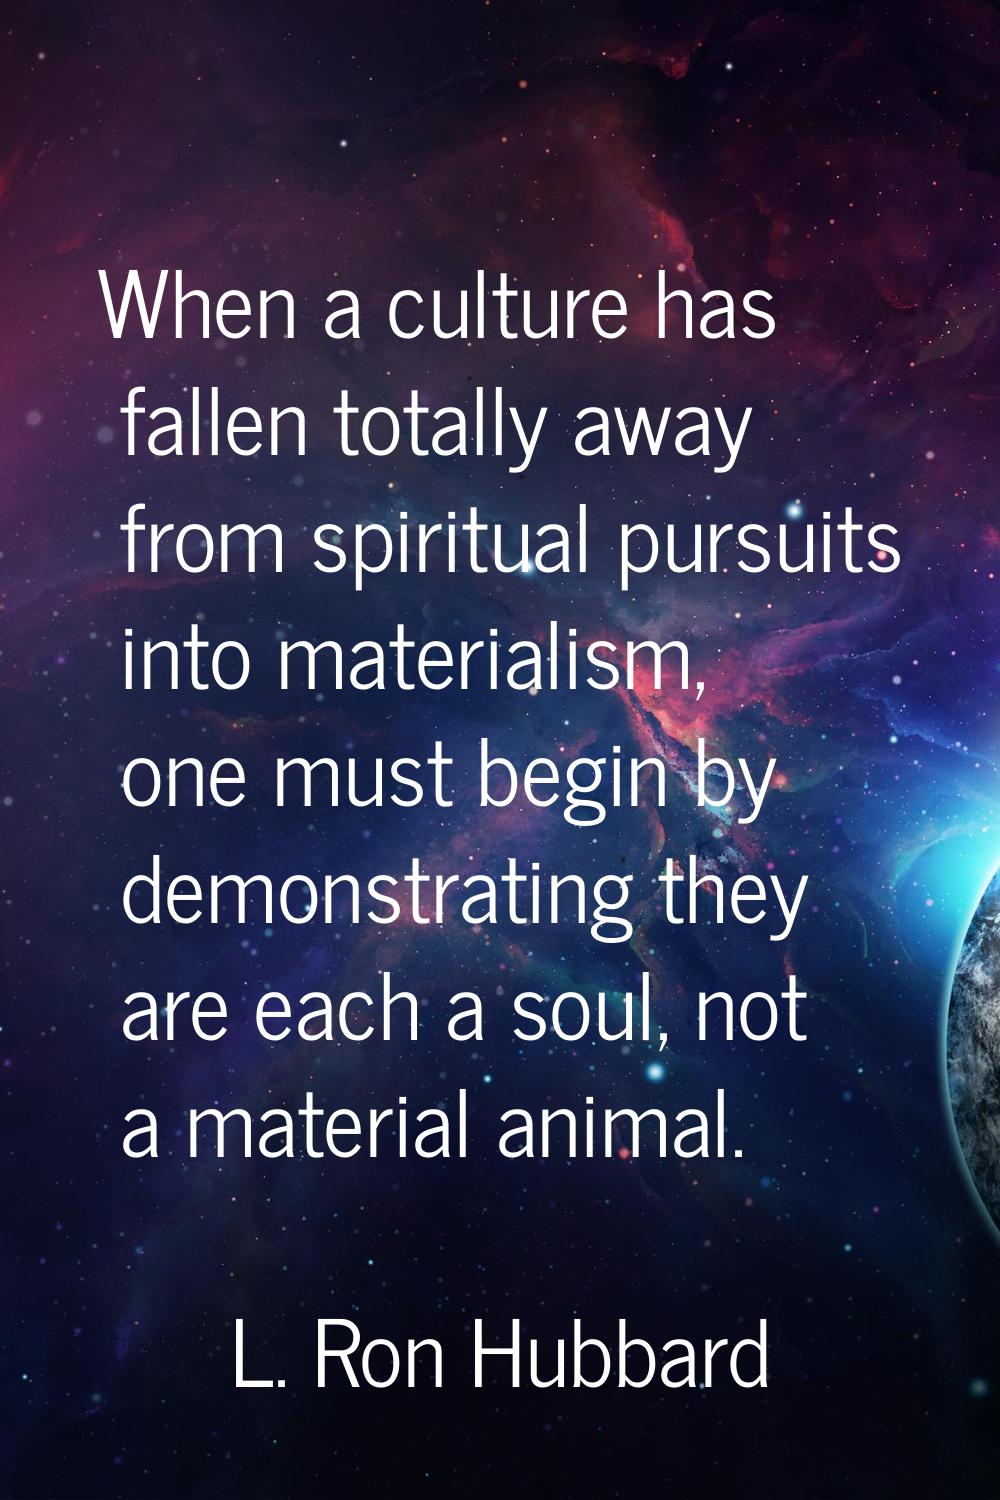 When a culture has fallen totally away from spiritual pursuits into materialism, one must begin by 